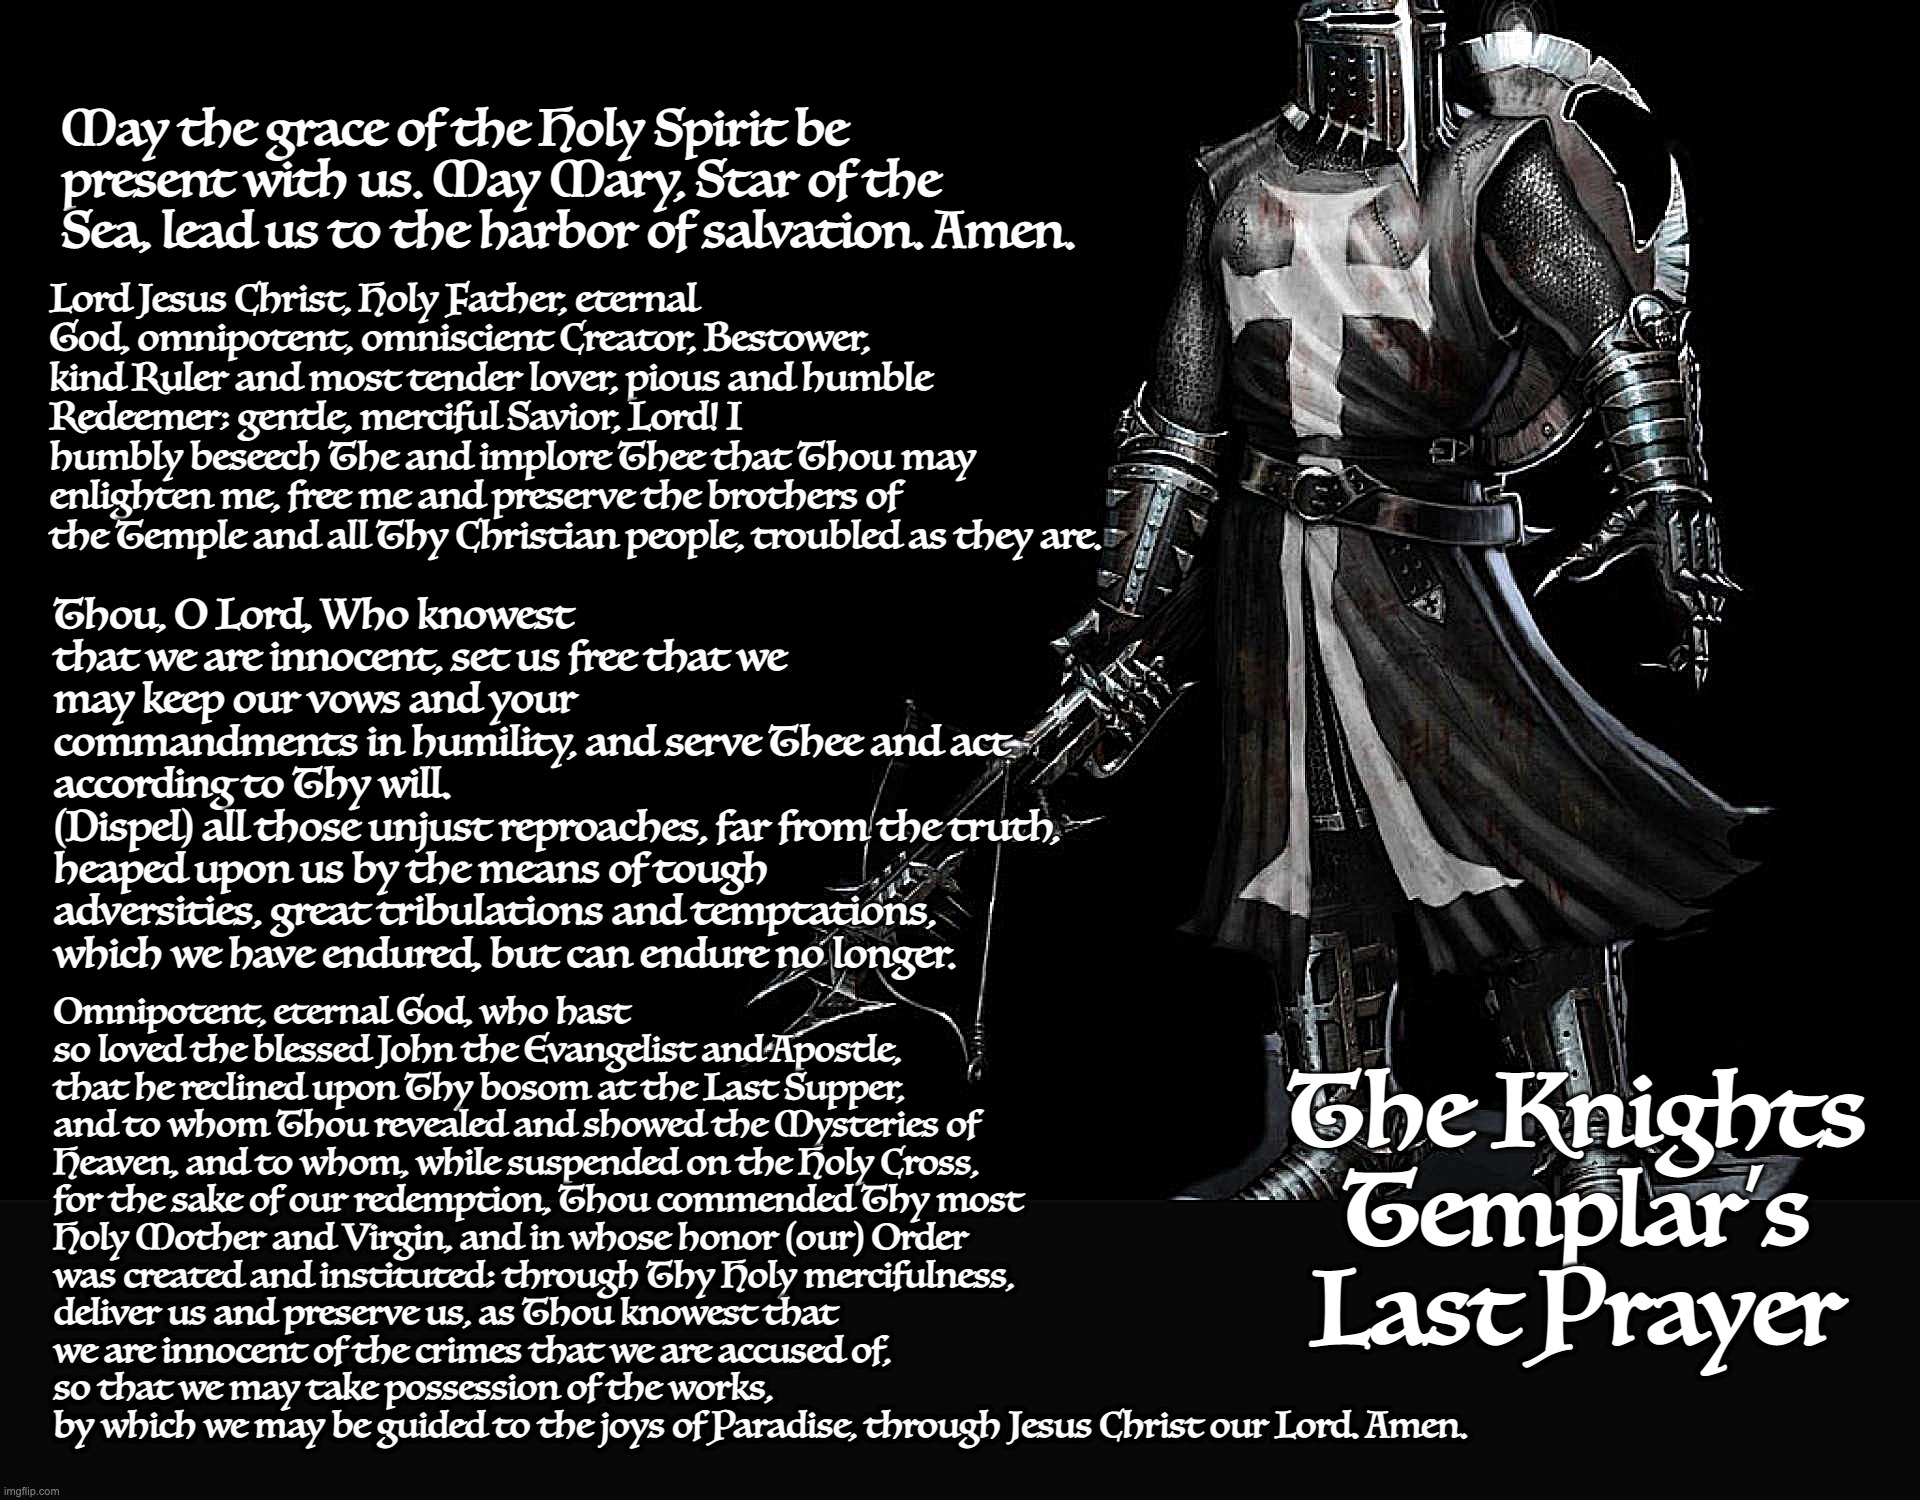 The Knights Templar's Last Prayer circa 1314 | May the grace of the Holy Spirit be present with us. May Mary, Star of the Sea, lead us to the harbor of salvation. Amen. Lord Jesus Christ, Holy Father, eternal God, omnipotent, omniscient Creator, Bestower, kind Ruler and most tender lover, pious and humble Redeemer; gentle, merciful Savior, Lord! I humbly beseech The and implore Thee that Thou may enlighten me, free me and preserve the brothers of the Temple and all Thy Christian people, troubled as they are. Thou, O Lord, Who knowest that we are innocent, set us free that we may keep our vows and your 
commandments in humility, and serve Thee and act according to Thy will. 
(Dispel) all those unjust reproaches, far from the truth, heaped upon us by the means of tough adversities, great tribulations and temptations, which we have endured, but can endure no longer. Omnipotent, eternal God, who hast so loved the blessed John the Evangelist and Apostle, that he reclined upon Thy bosom at the Last Supper, and to whom Thou revealed and showed the Mysteries of Heaven, and to whom, while suspended on the Holy Cross, for the sake of our redemption, Thou commended Thy most Holy Mother and Virgin, and in whose honor (our) Order was created and instituted; through Thy Holy mercifulness, deliver us and preserve us, as Thou knowest that we are innocent of the crimes that we are accused of, so that we may take possession of the works, 
by which we may be guided to the joys of Paradise, through Jesus Christ our Lord. Amen. The Knights Templar’s Last Prayer | image tagged in knights templar | made w/ Imgflip meme maker